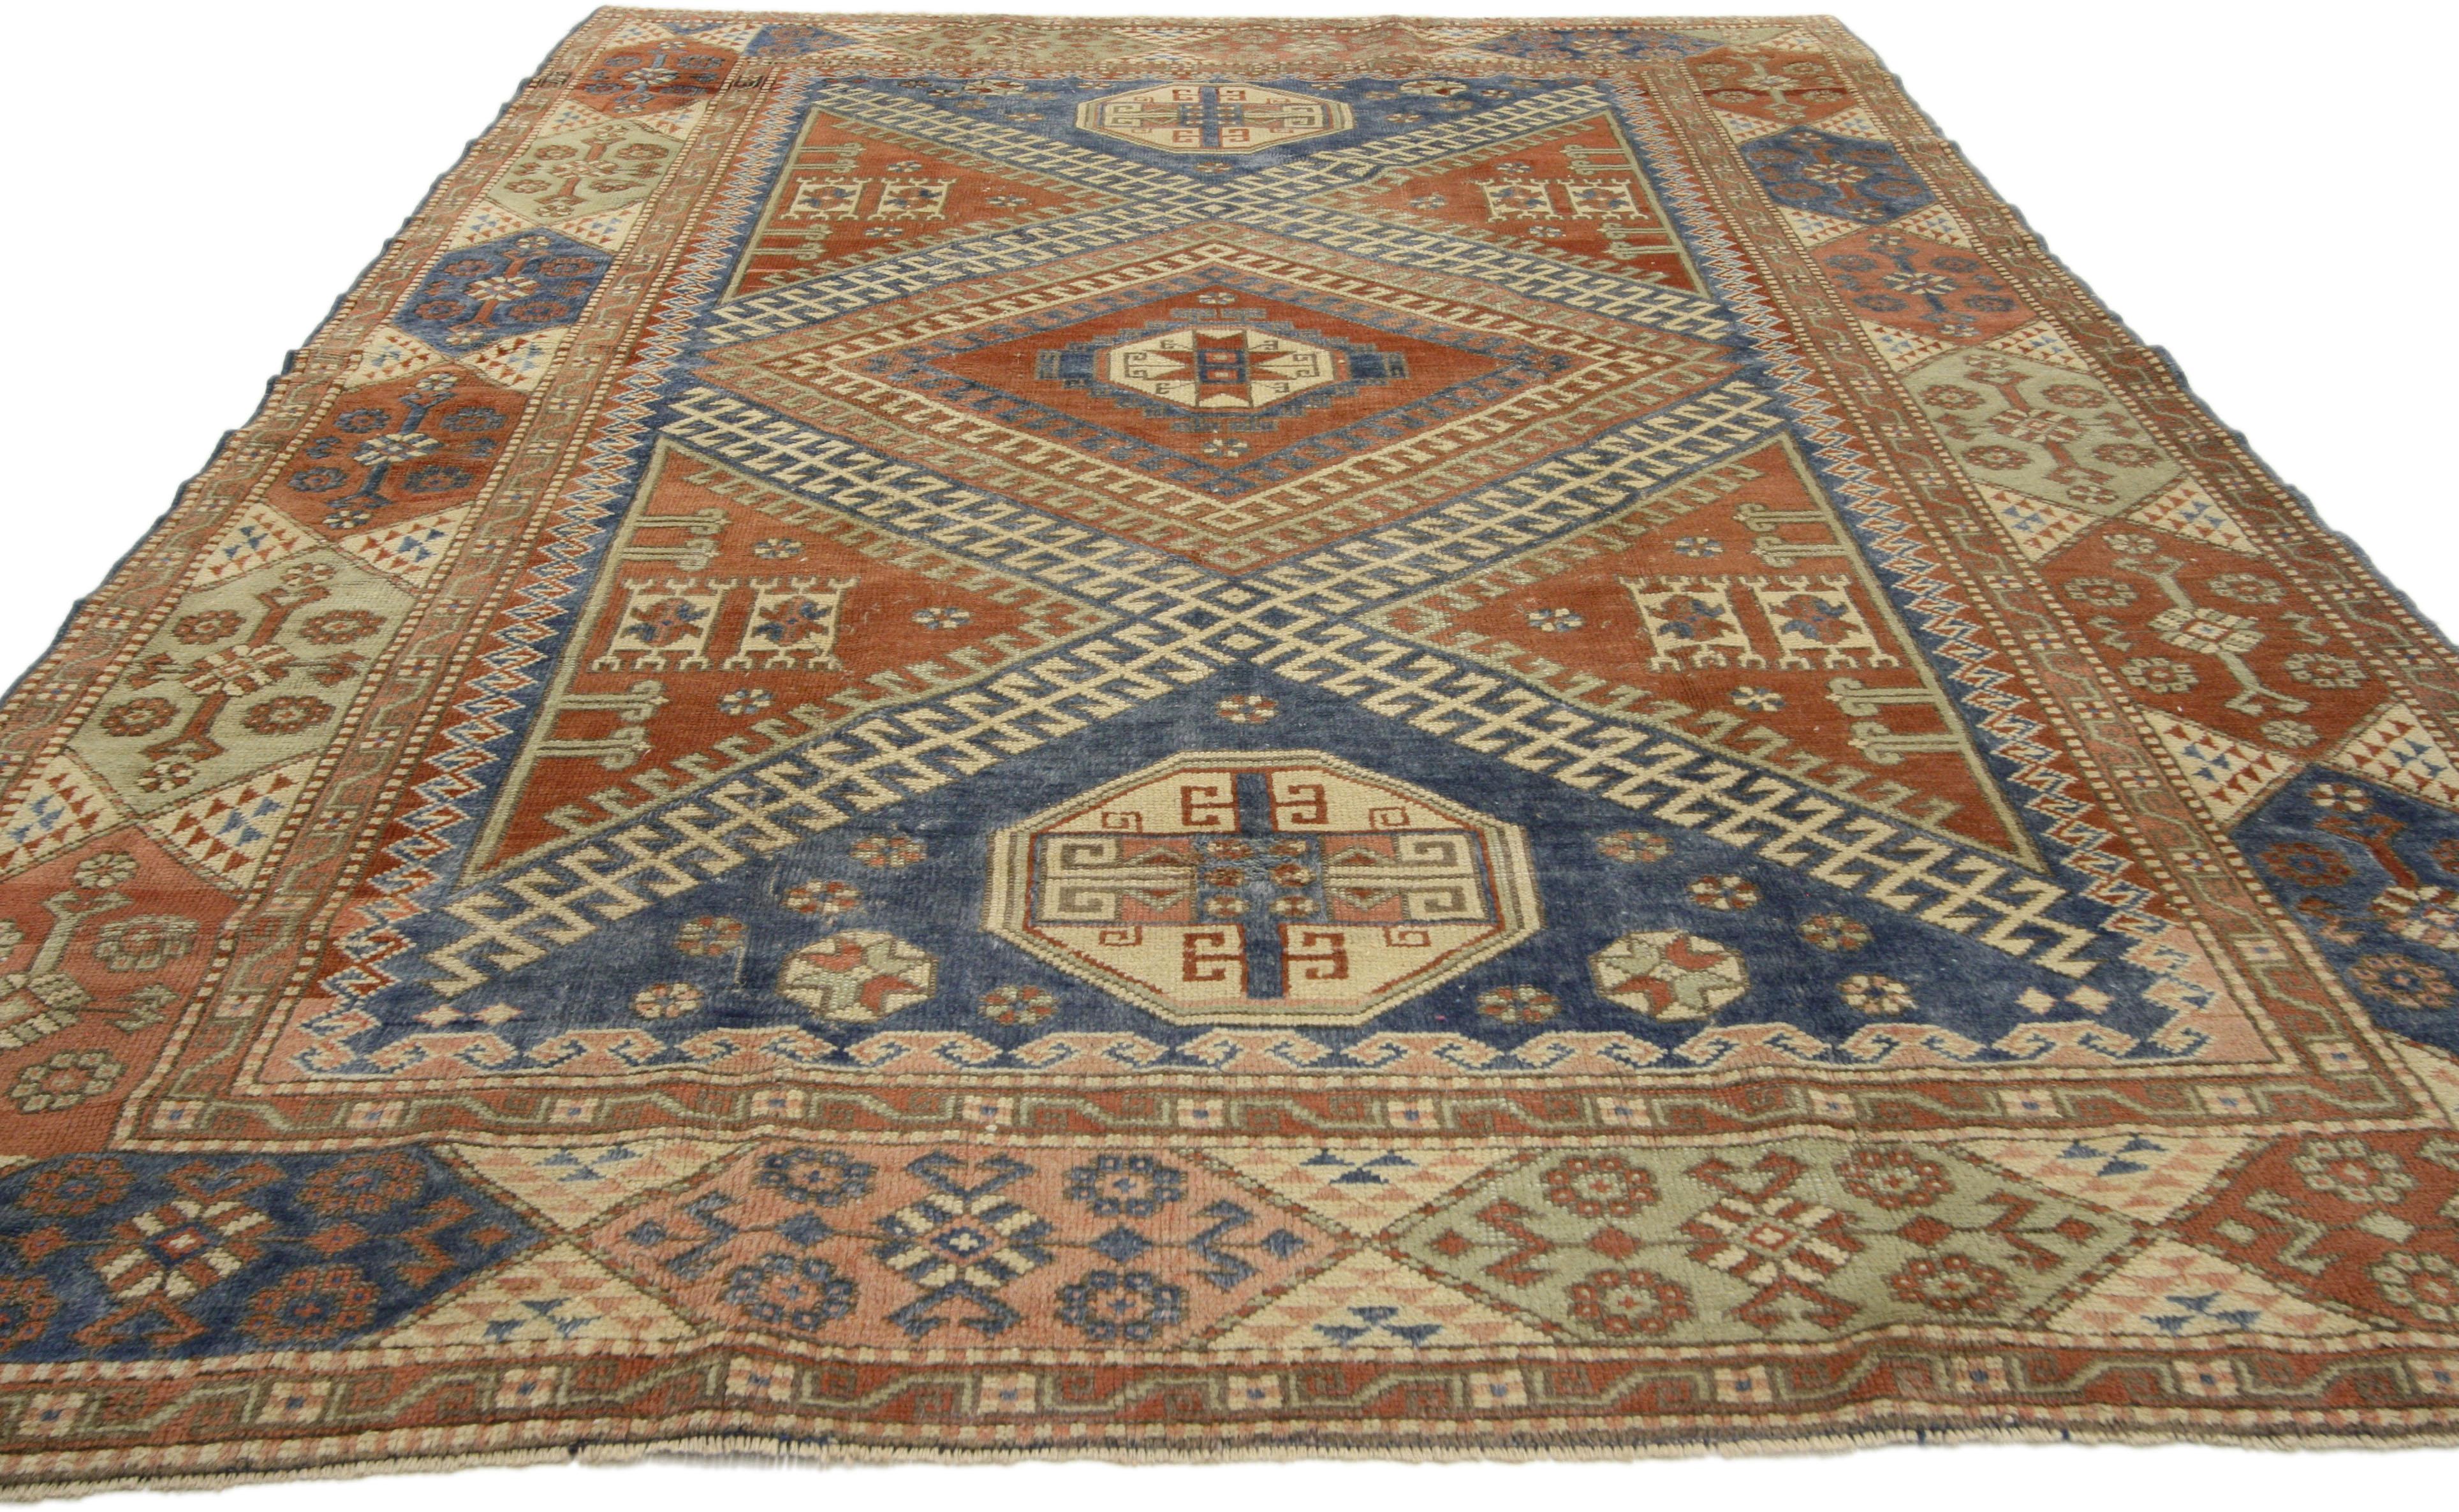 51177 Mid-Century Modern Vintage Turkish Bergama Rug with Nomadic Tribal Style. With its time softened colors and bold elemental nature, this eccentric mid-20th century vintage Turkish Bergama rug embodies true rectilinear style composed of 